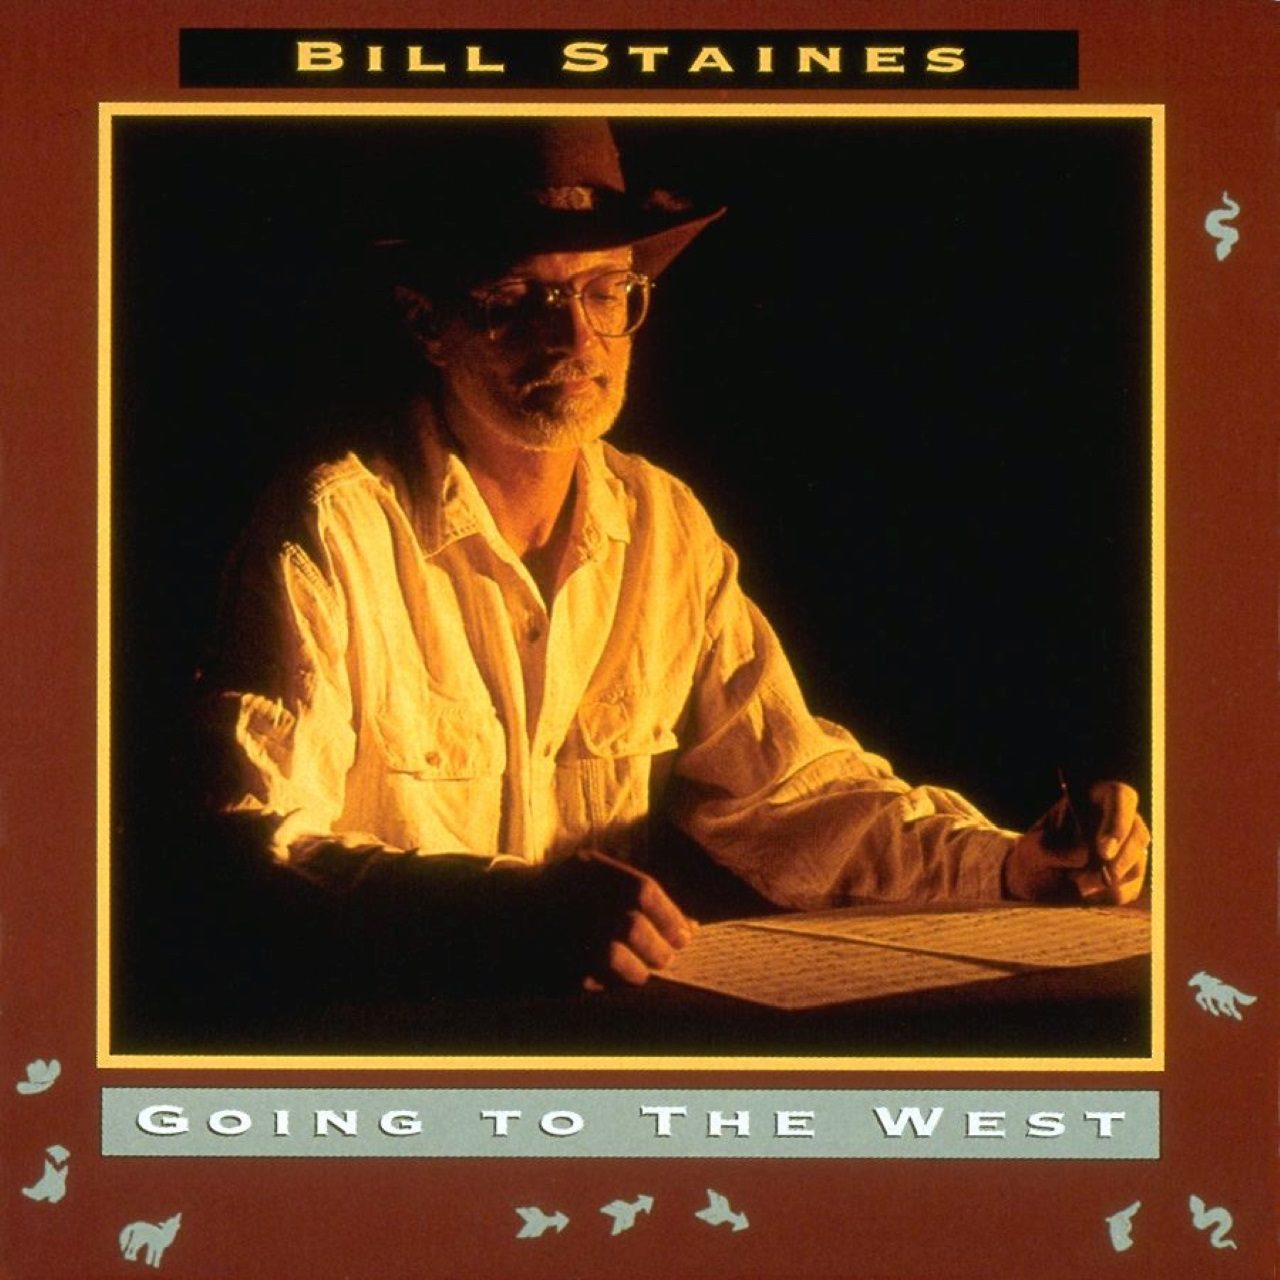 Bill Staines – Going To The West cover album